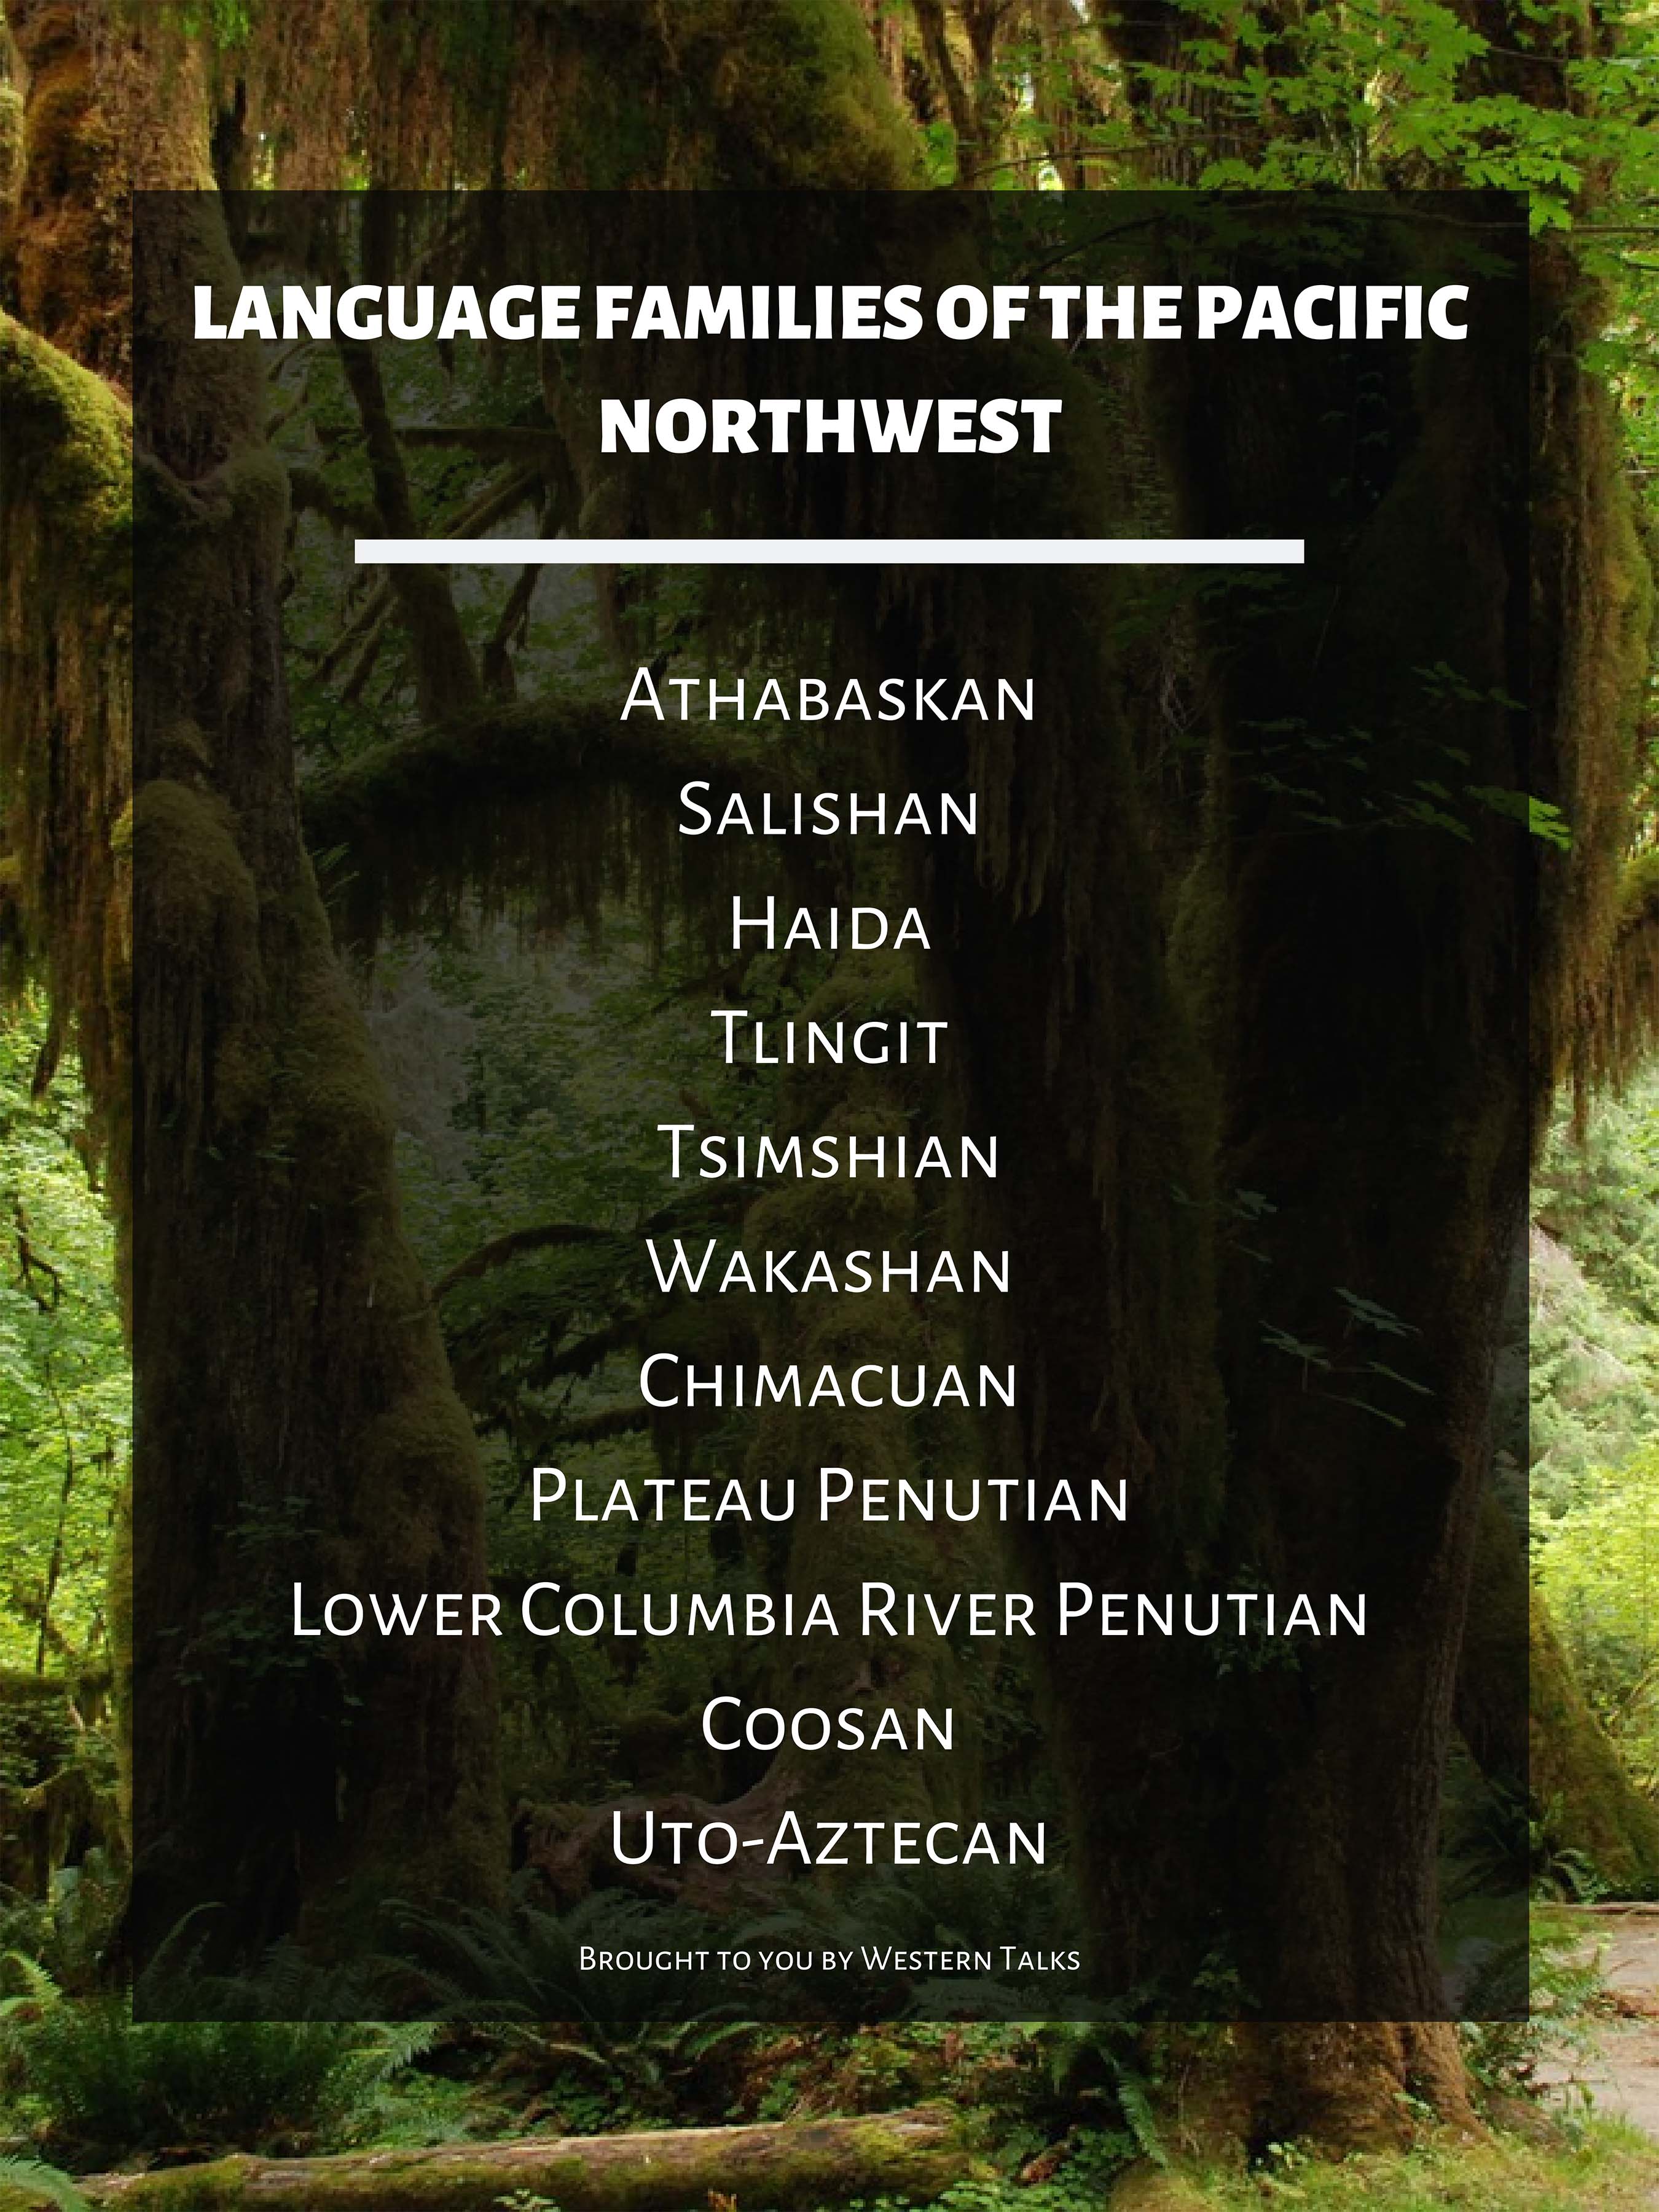 List of language families of the Pacific Northwest. Click on image to see full description.